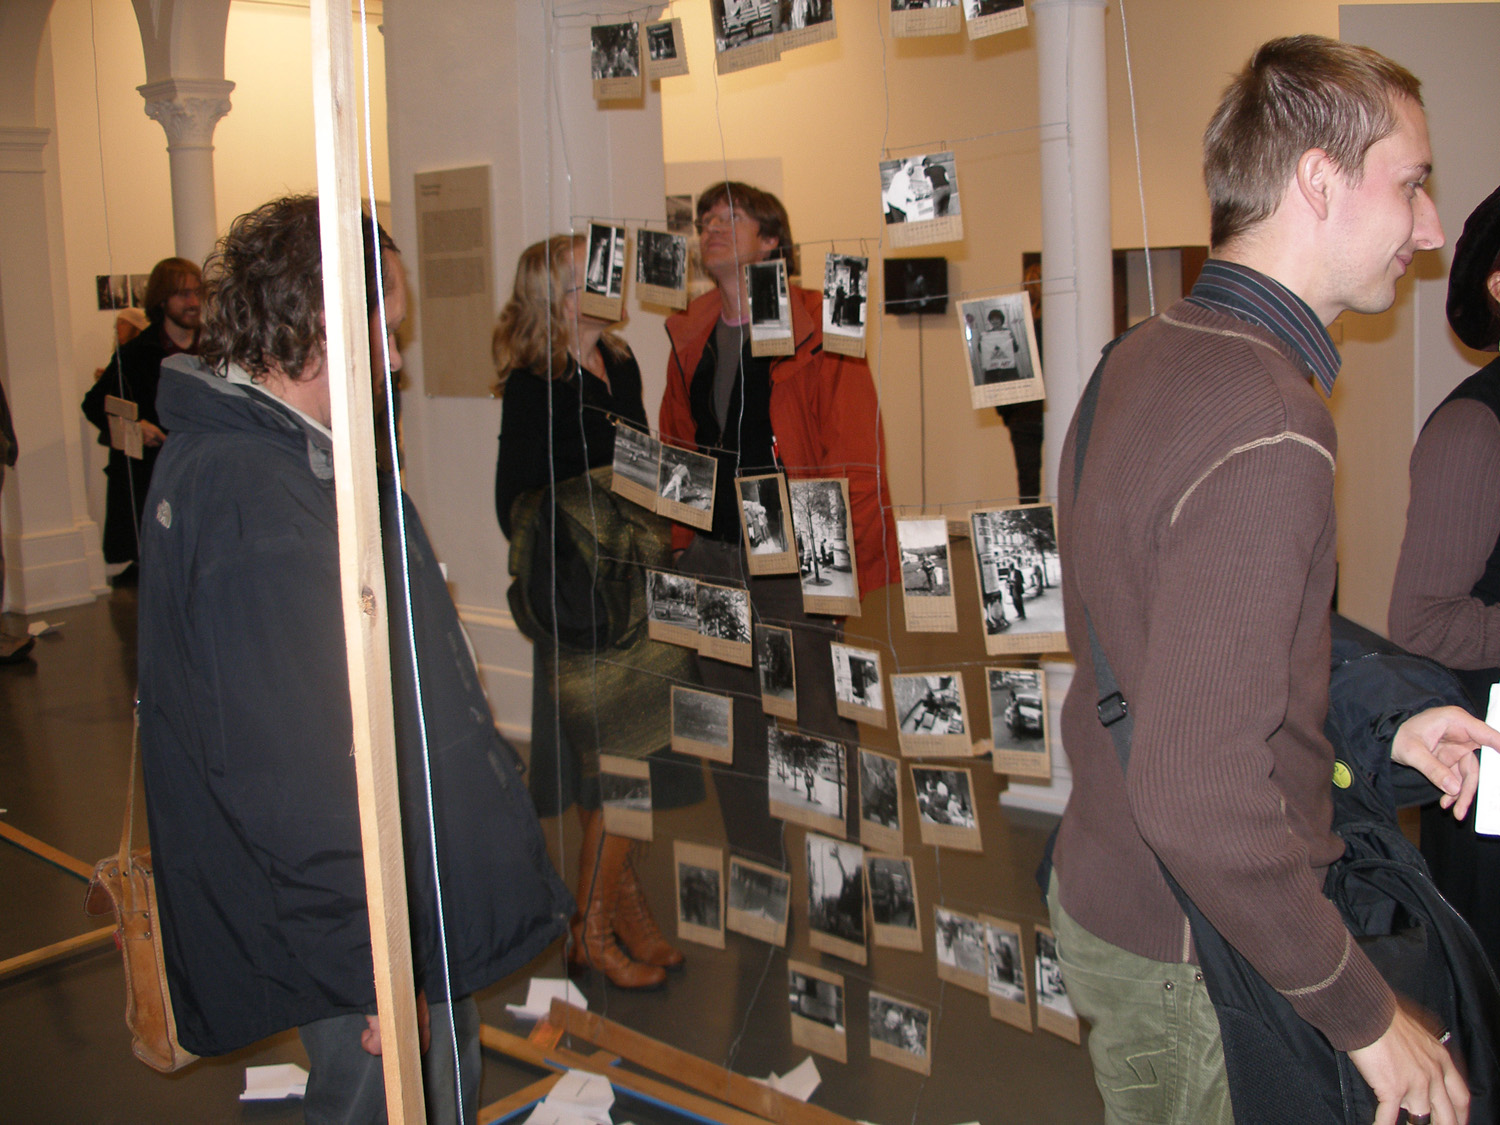 View of the reconstructed Poipoidrom at the opening of the exhibition Fluxus East, Künstlerhaus Bethanien, Berlin, 2007